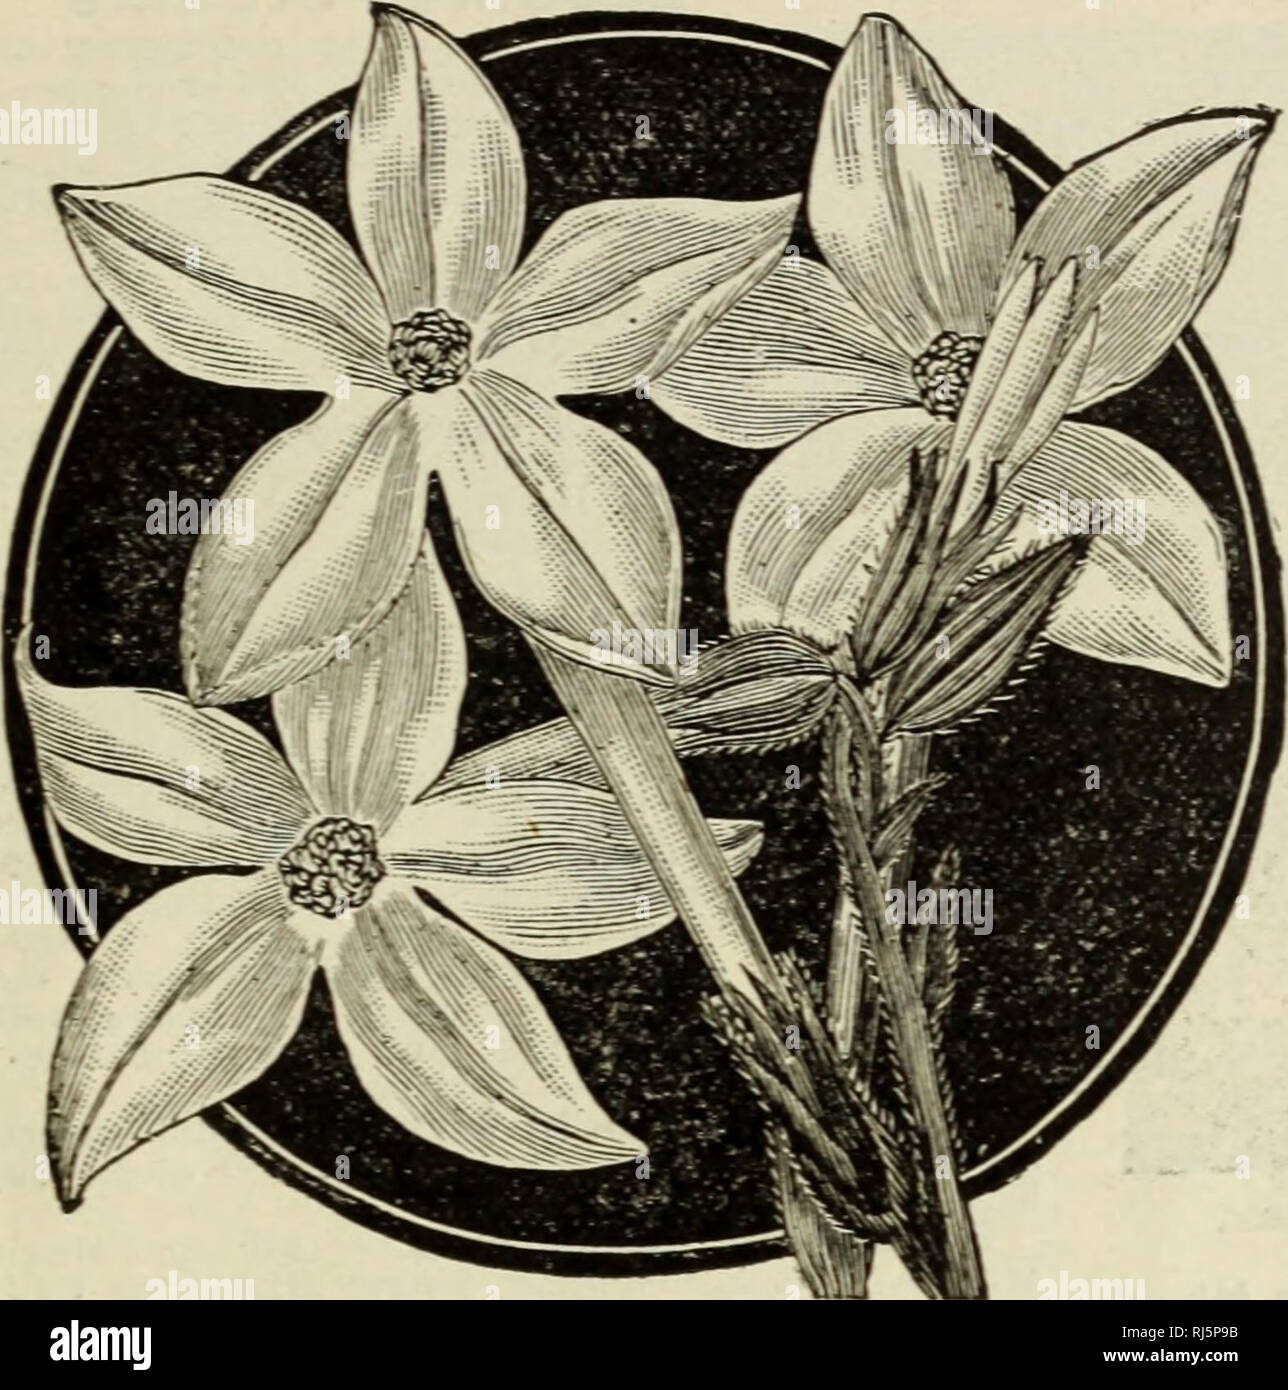 . Choice flower seeds 1912 : compliments of Miss Emma V. White. Flowers Seeds Catalogs; Seeds Catalogs; Vegetables Seeds Catalogs. Enid, Okla. —&quot;I planted your Petunia seed and had most beautiful Bowers from June until Nov. 26.&quot;' Mrs. S. A. Cook. -35-. NICOTIANA NIcotlana Affinls. The Sweet sctnted Nicotine, or Tobacco Plant. It will bear con- tinuously an abundance of large pure white flowers of delicious fragrance. 2 to 3 feet. Pkt.. 5^0 seeds. 5c. NIcotiana Sanderae Hybrids. Small, graceful flowers, in many shades of crimson, purple, carmine, pink or mauve, 2 to 3 feet. Mixed. Pkt Stock Photo